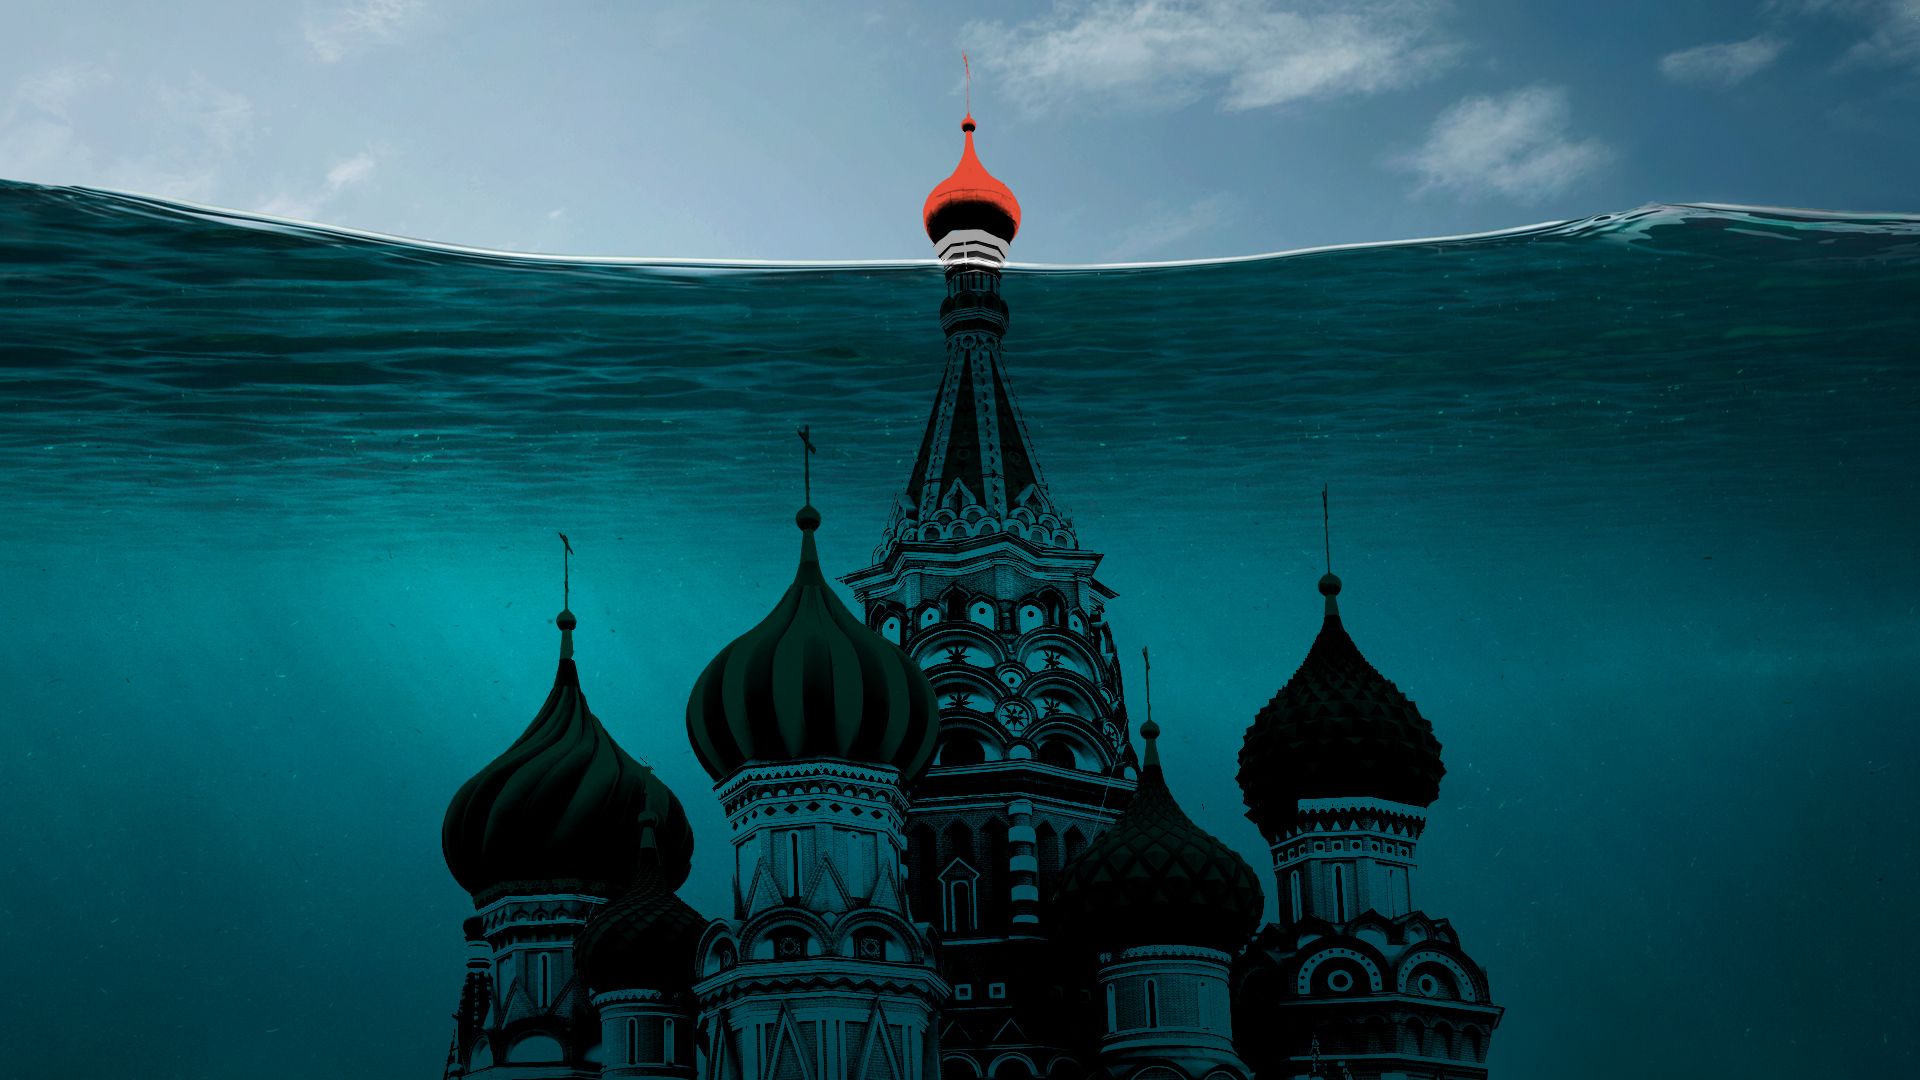 The tip of a Kremlin palace is visible, but the rest is underwater